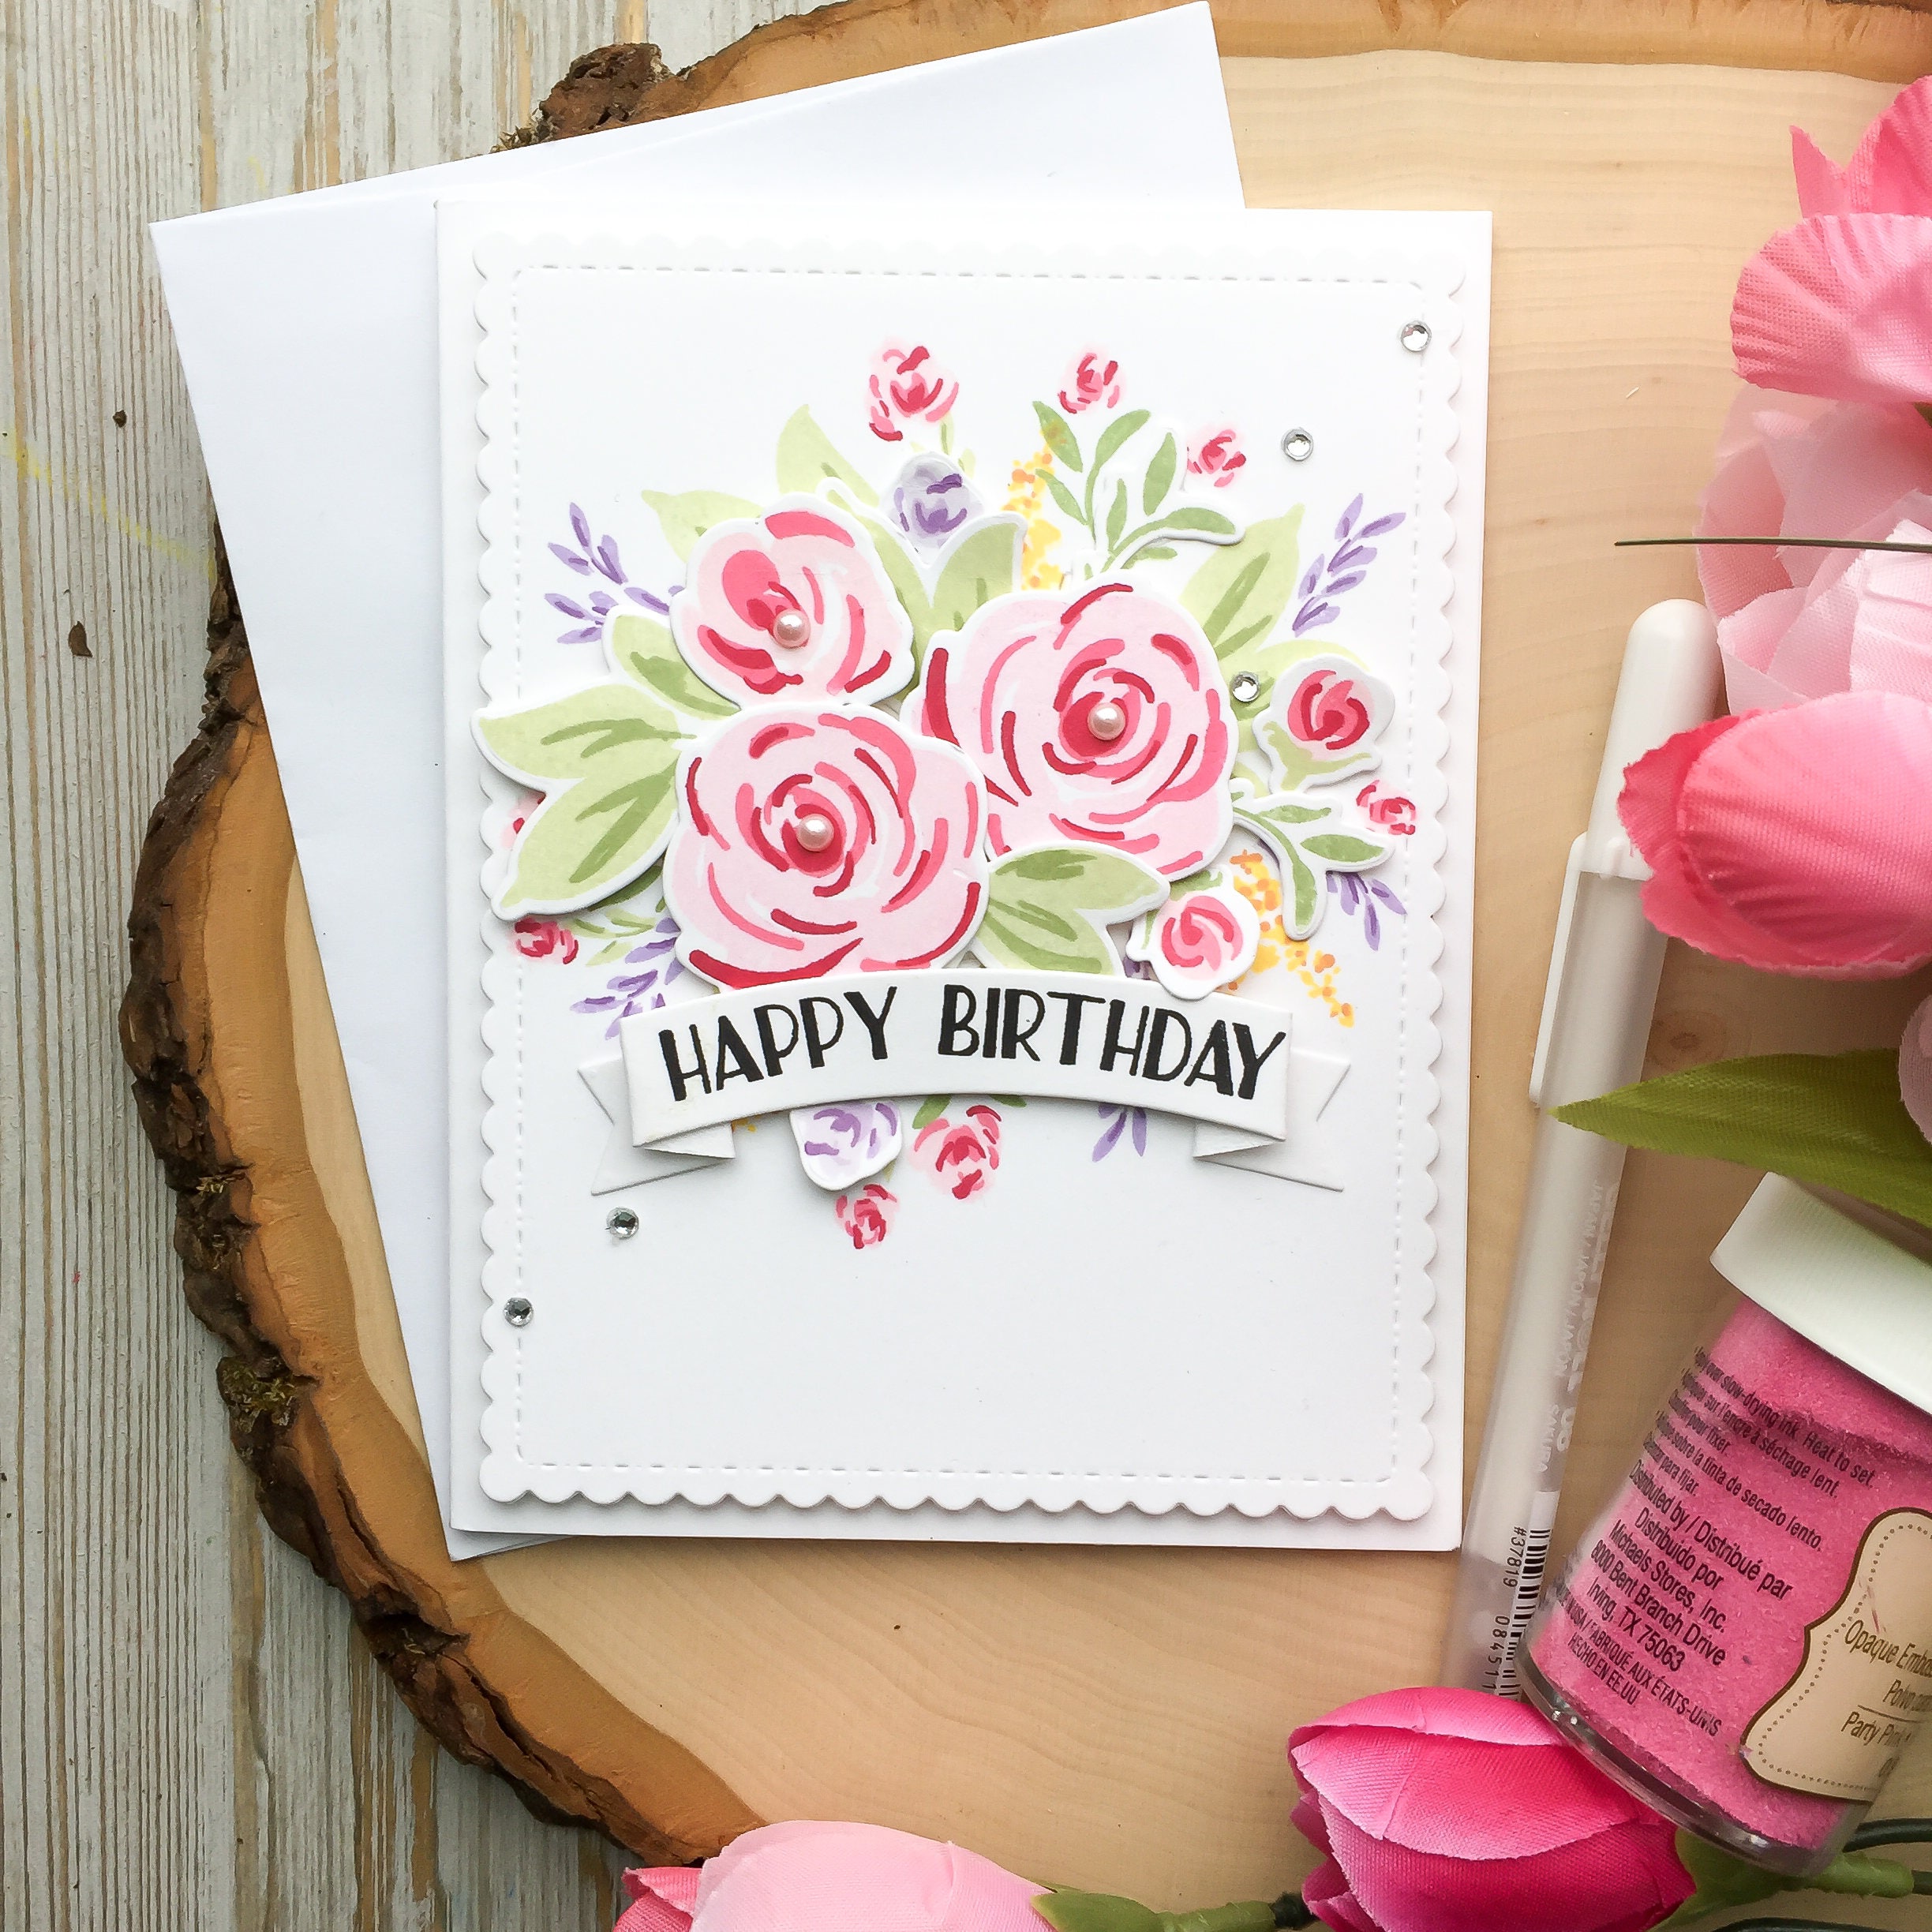 Ladies Wife Girlfriend Mother Daughter Grandmother Pretty Floral Birthday Card 